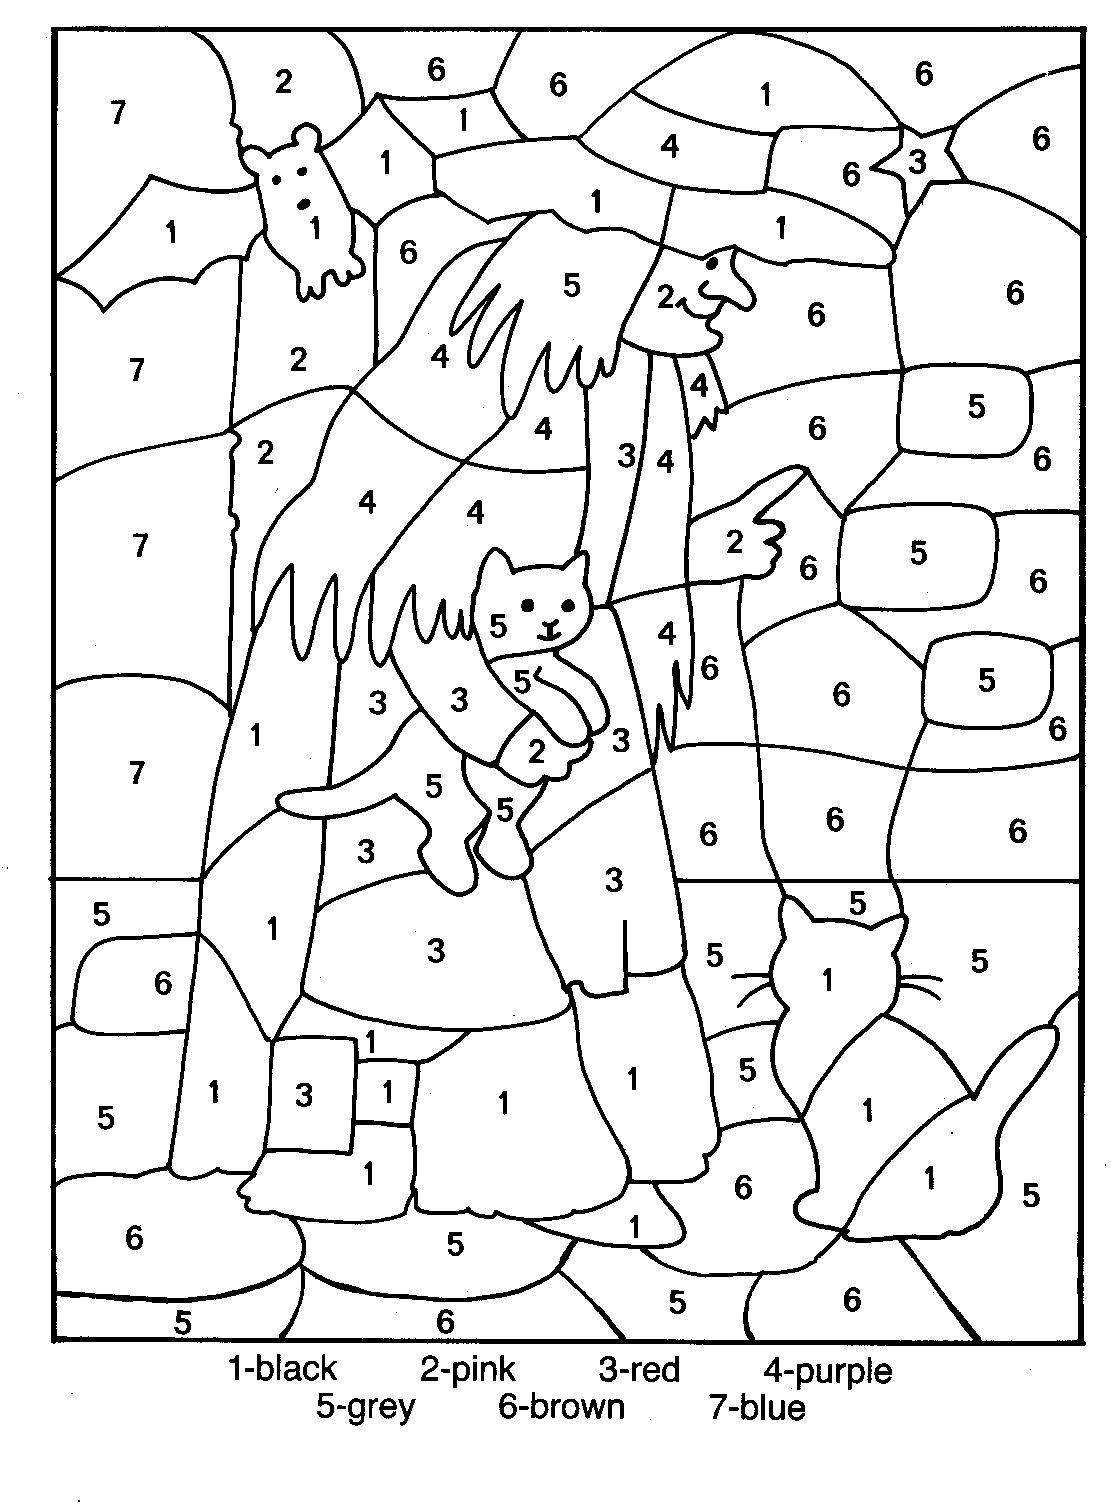 Free Printable Color by Number Coloring Pages Best Coloring Pages For